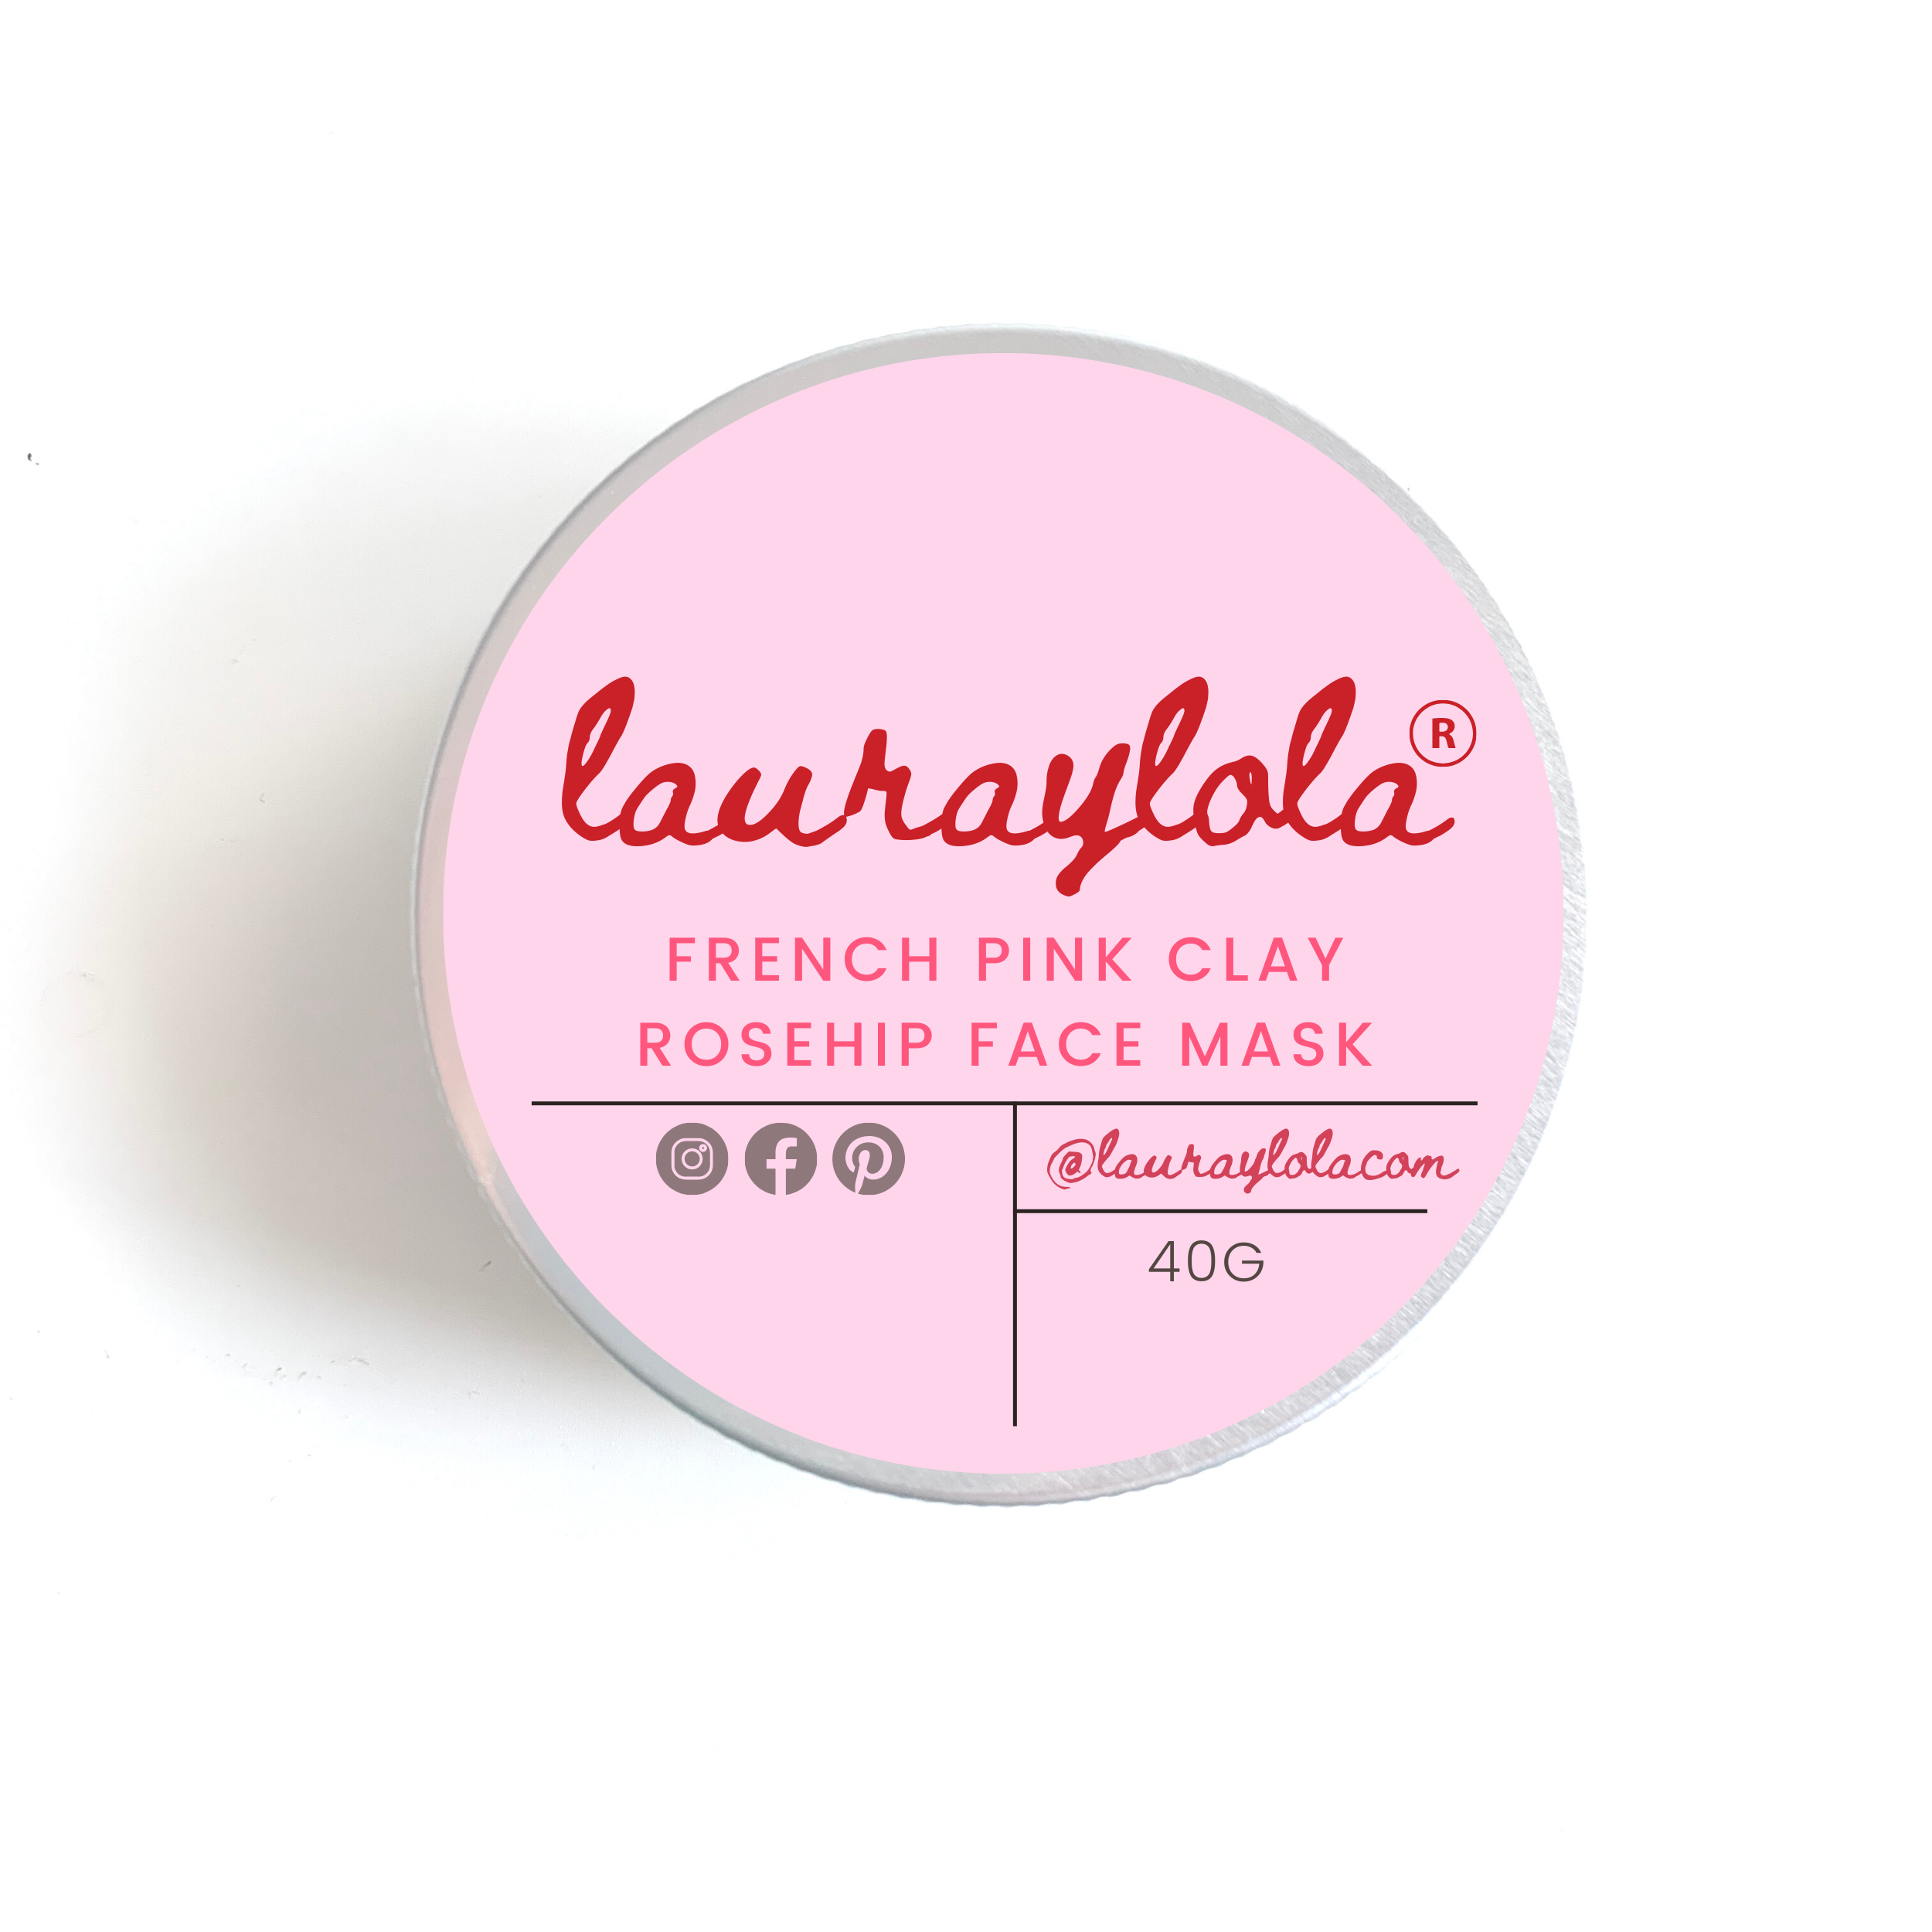 LUXURY FRENCH PINK CLAY ROSEHIP FACIAL SKIN TREATMENT